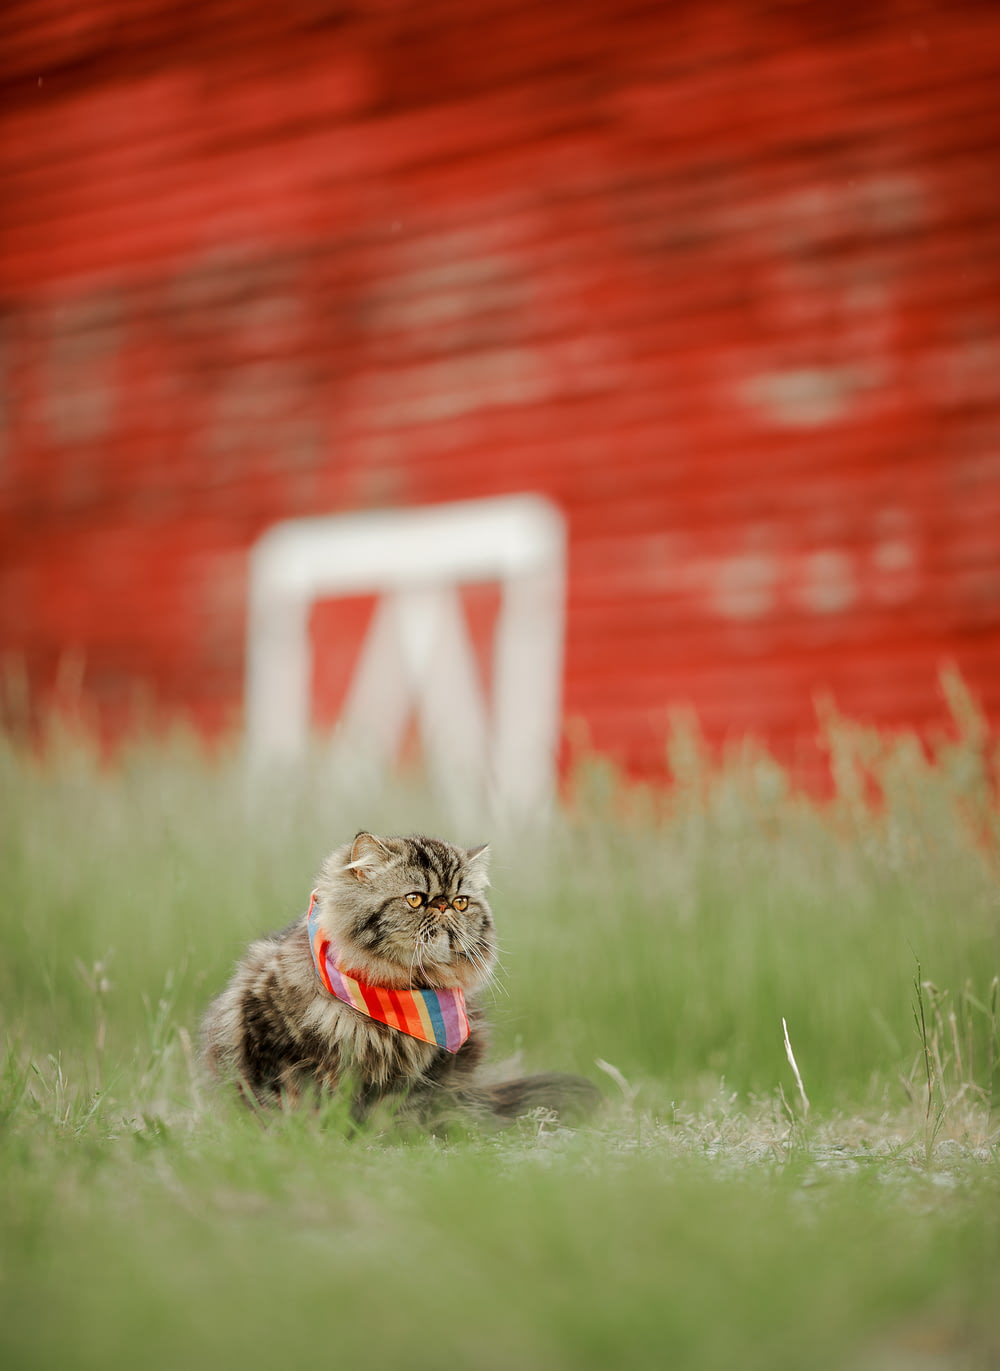 a cat sitting in the grass in front of a red barn